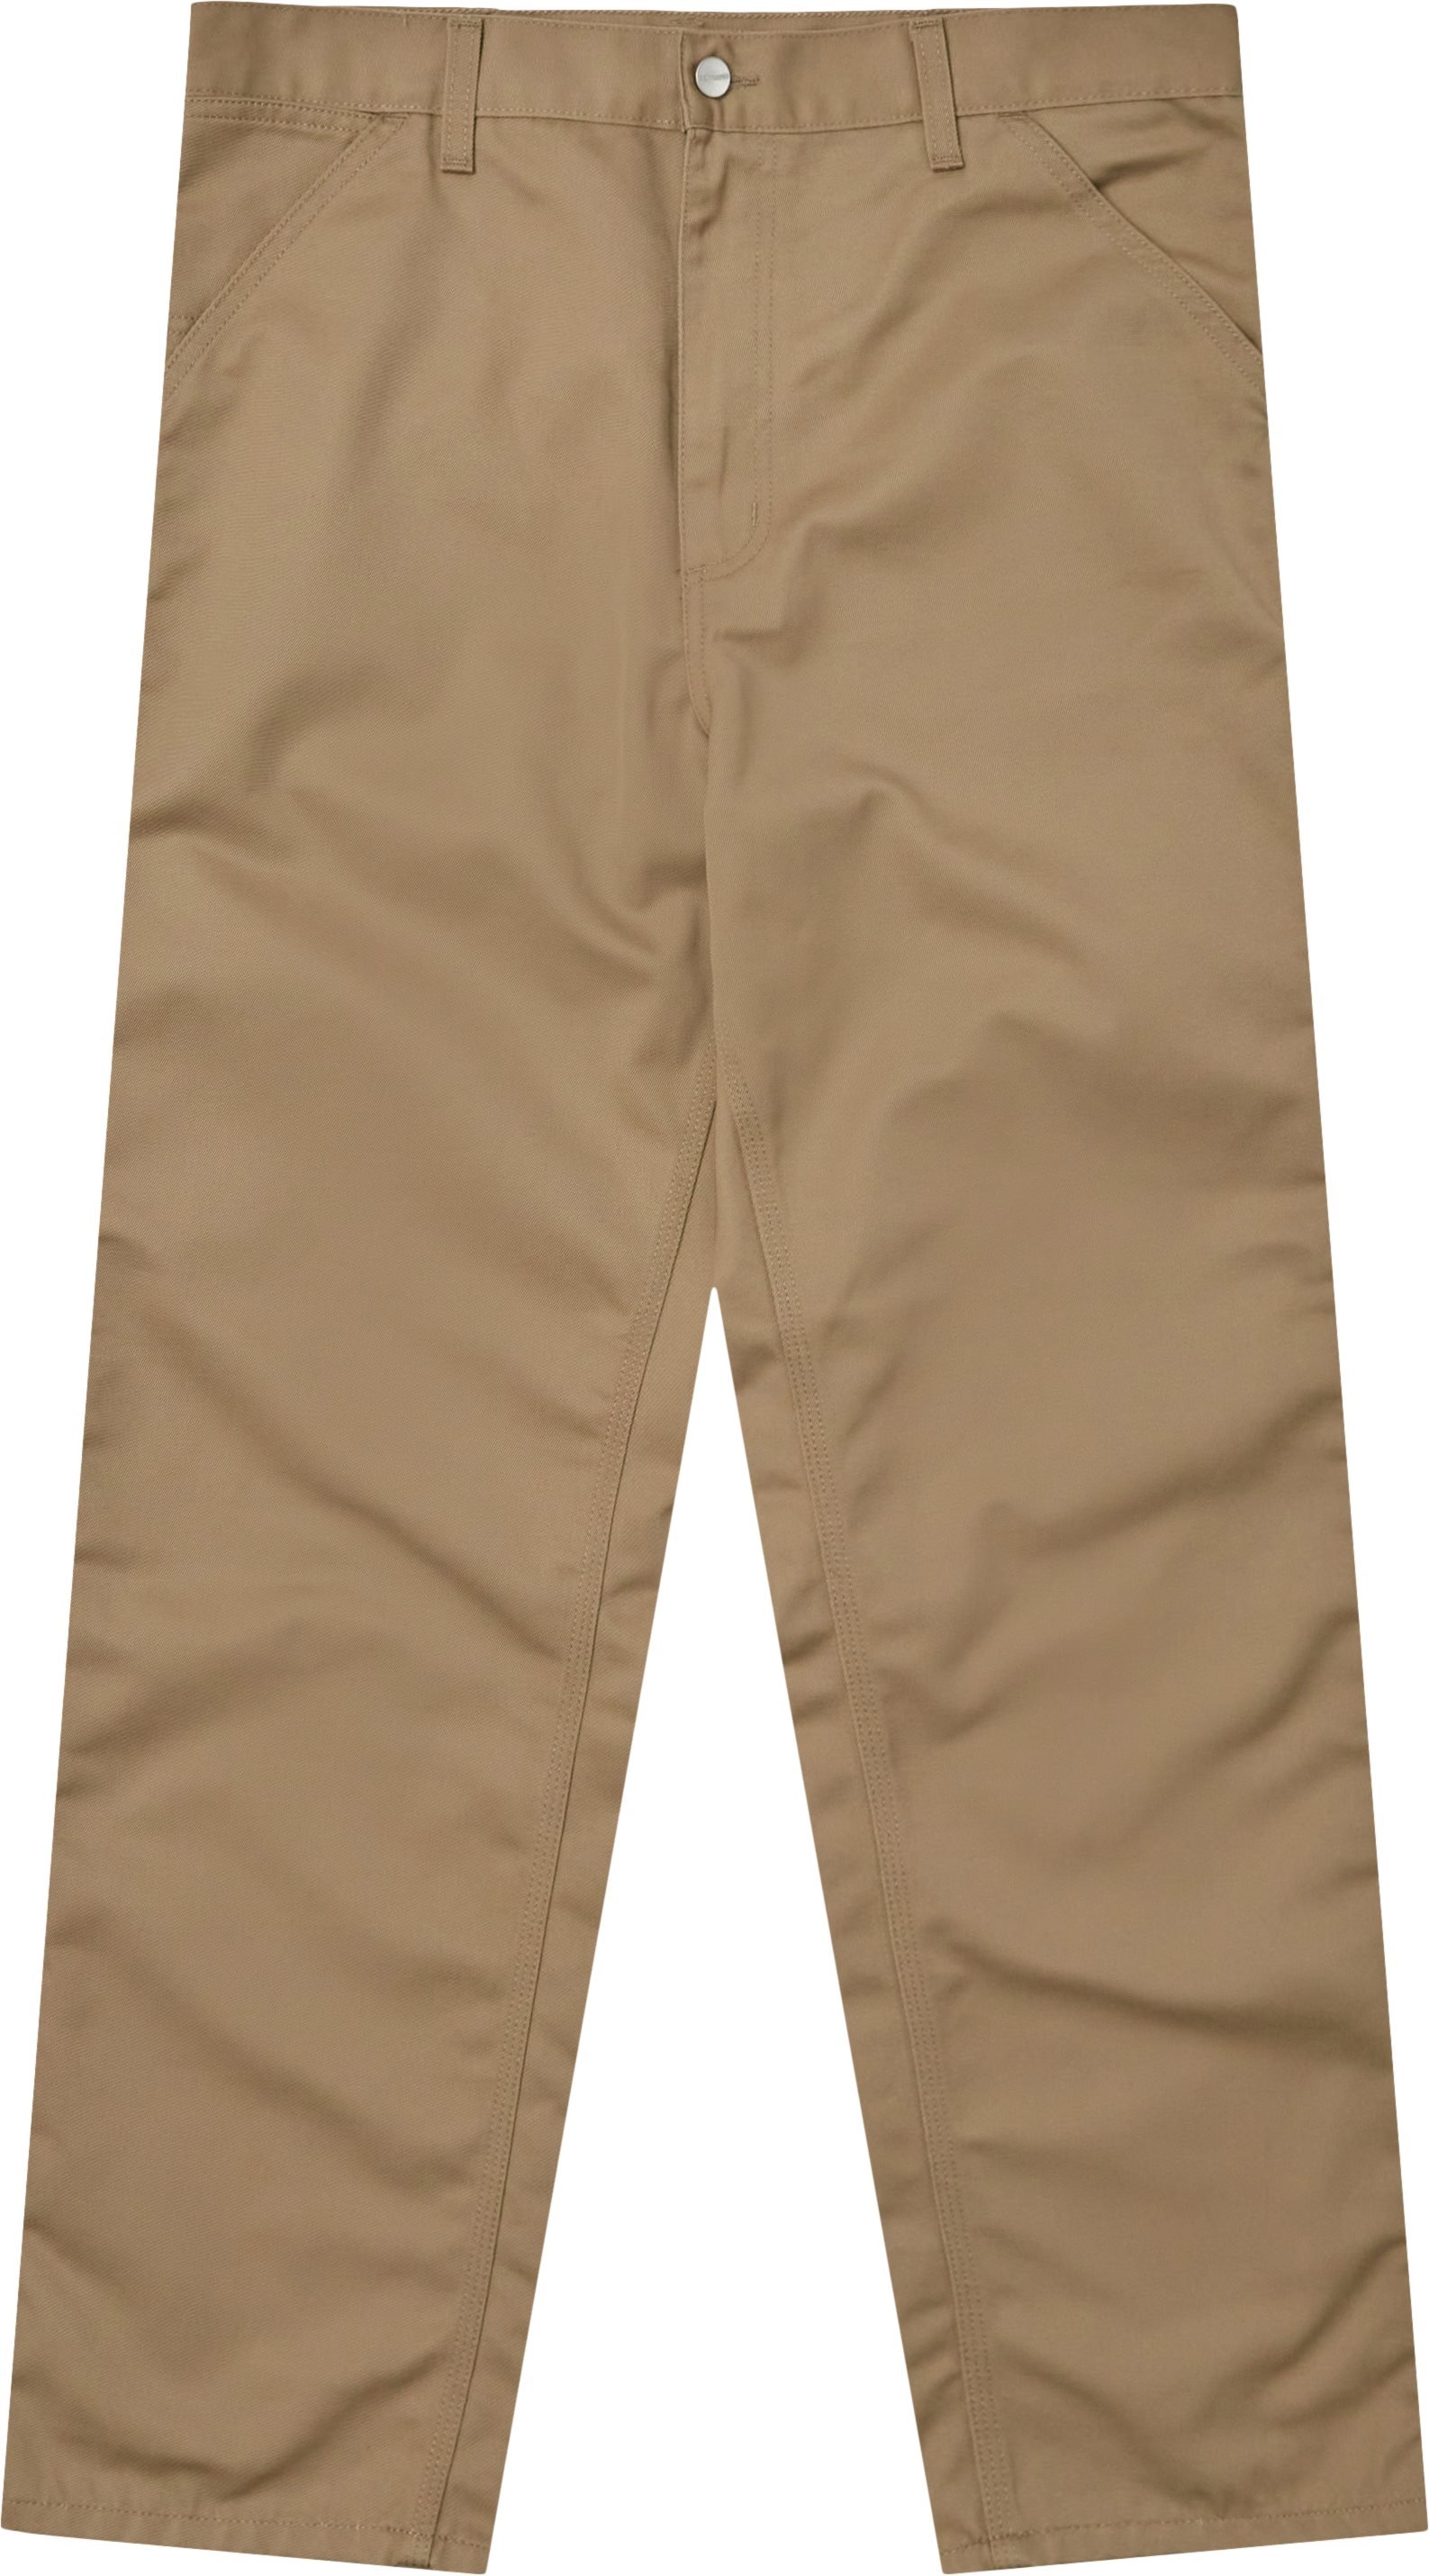 Simple Pant - Trousers - Straight fit - Sand